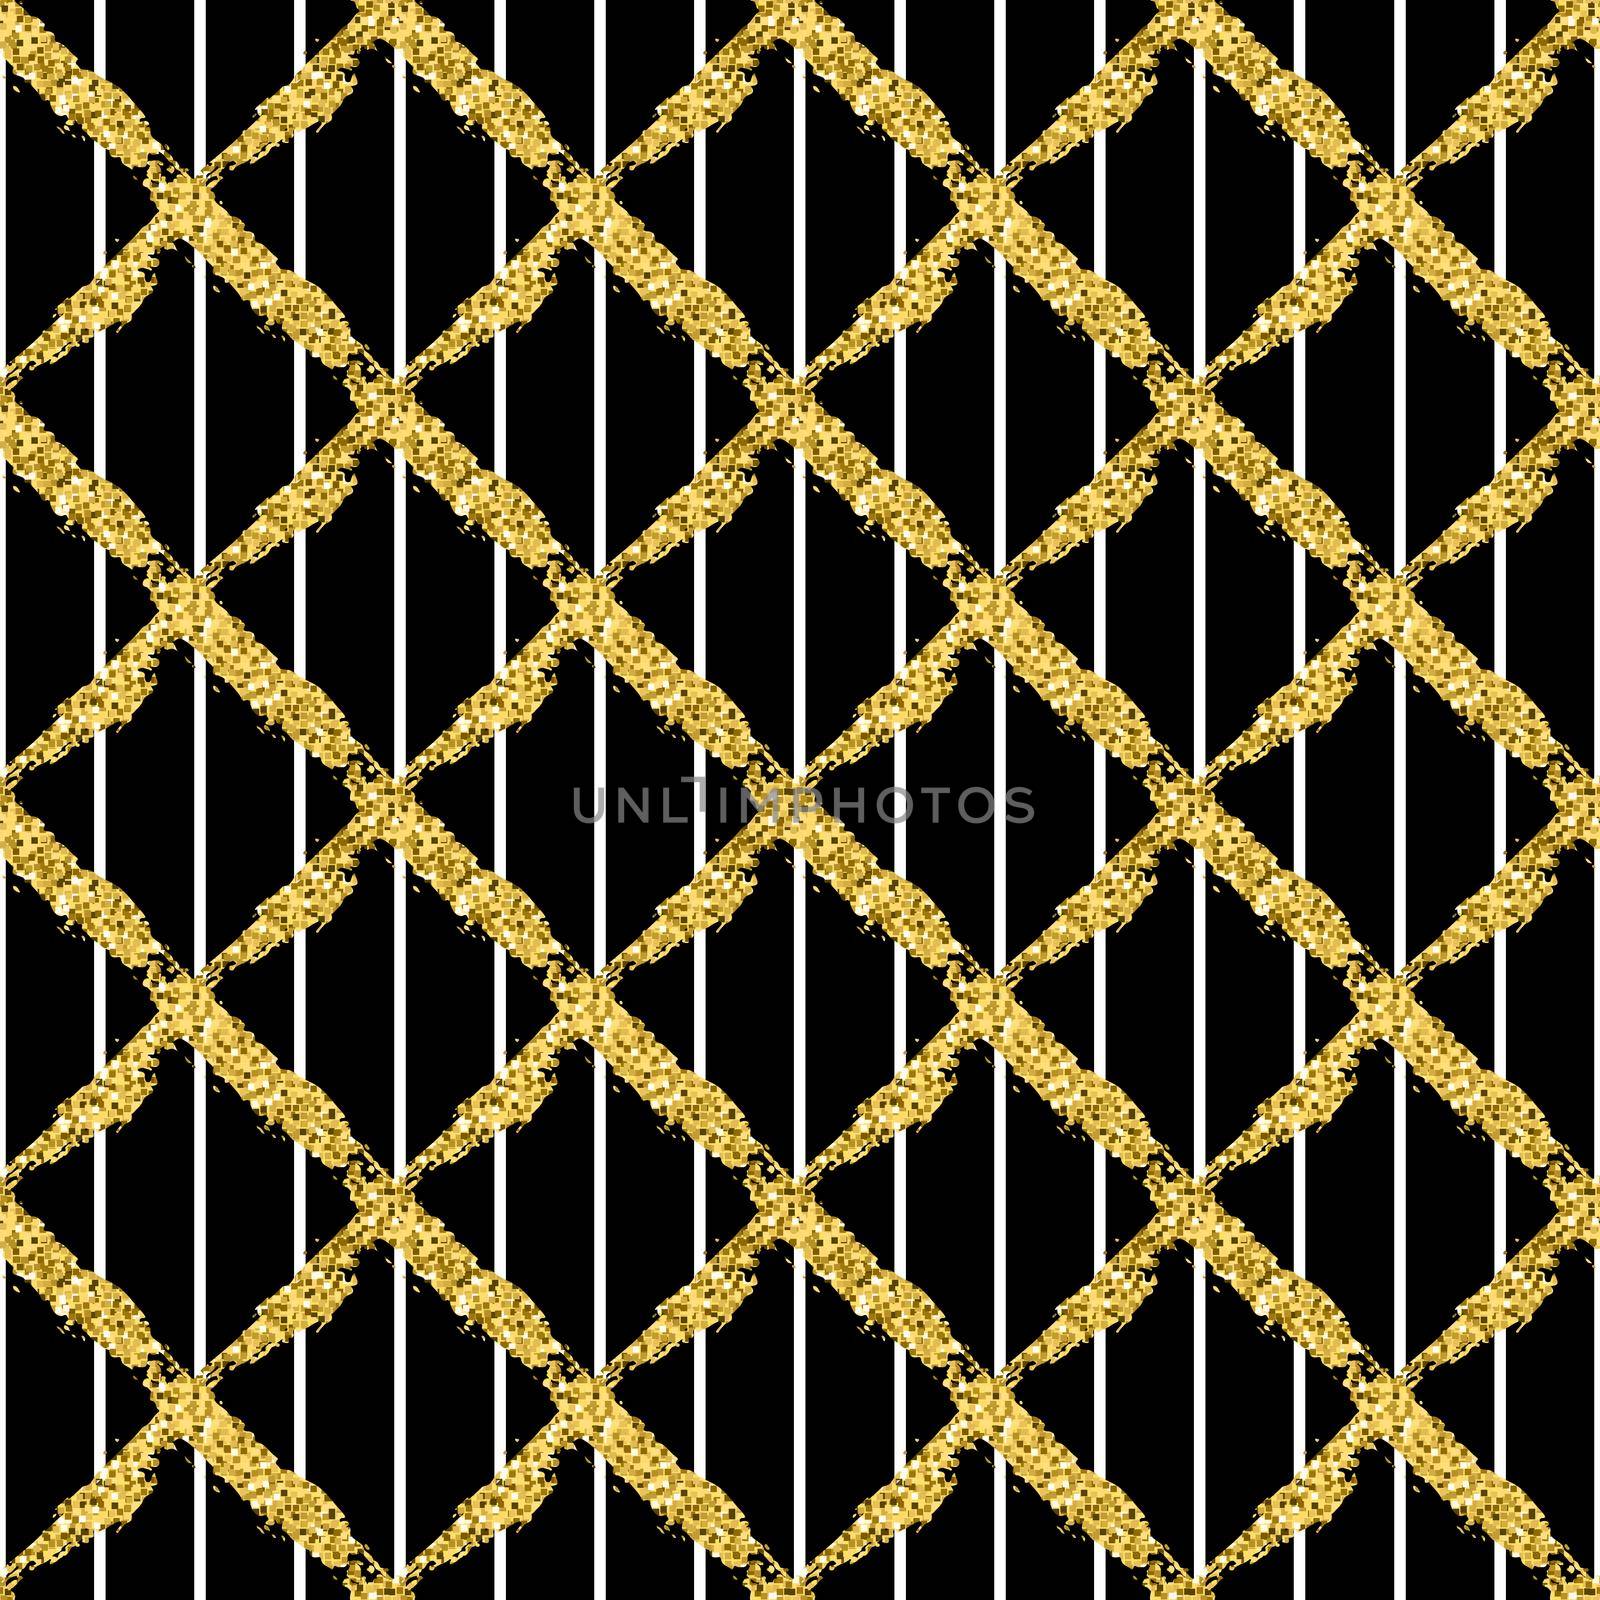 Modern seamless pattern with brush stripes plaid and cross. White, gold metallic color on black background. Golden glitter texture. Ink geometric elements. Fashion catwalk style. Repeat fabric cloth by DesignAB